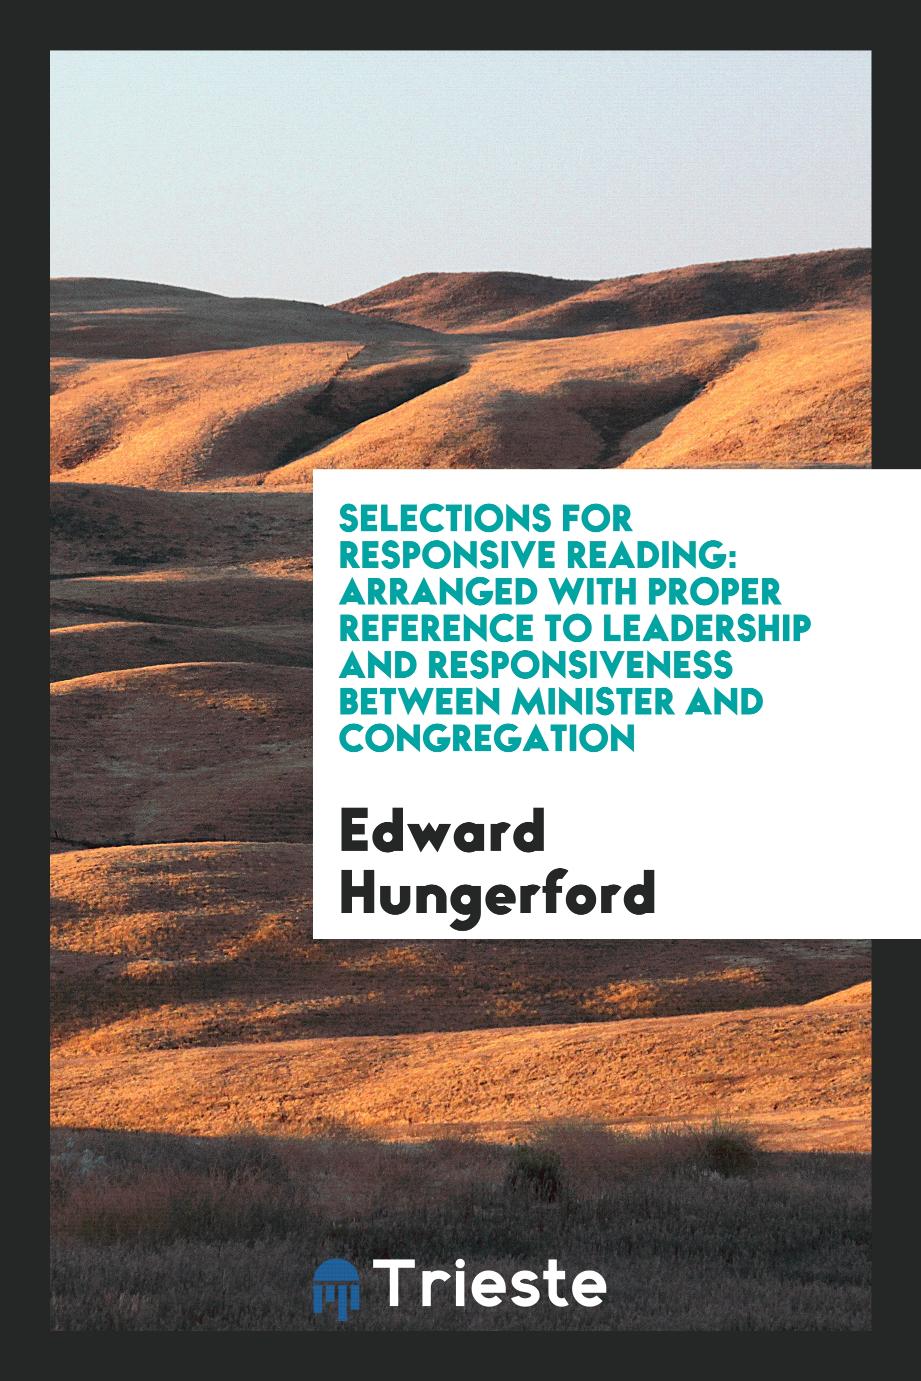 Selections for responsive reading: arranged with proper reference to leadership and responsiveness between minister and congregation